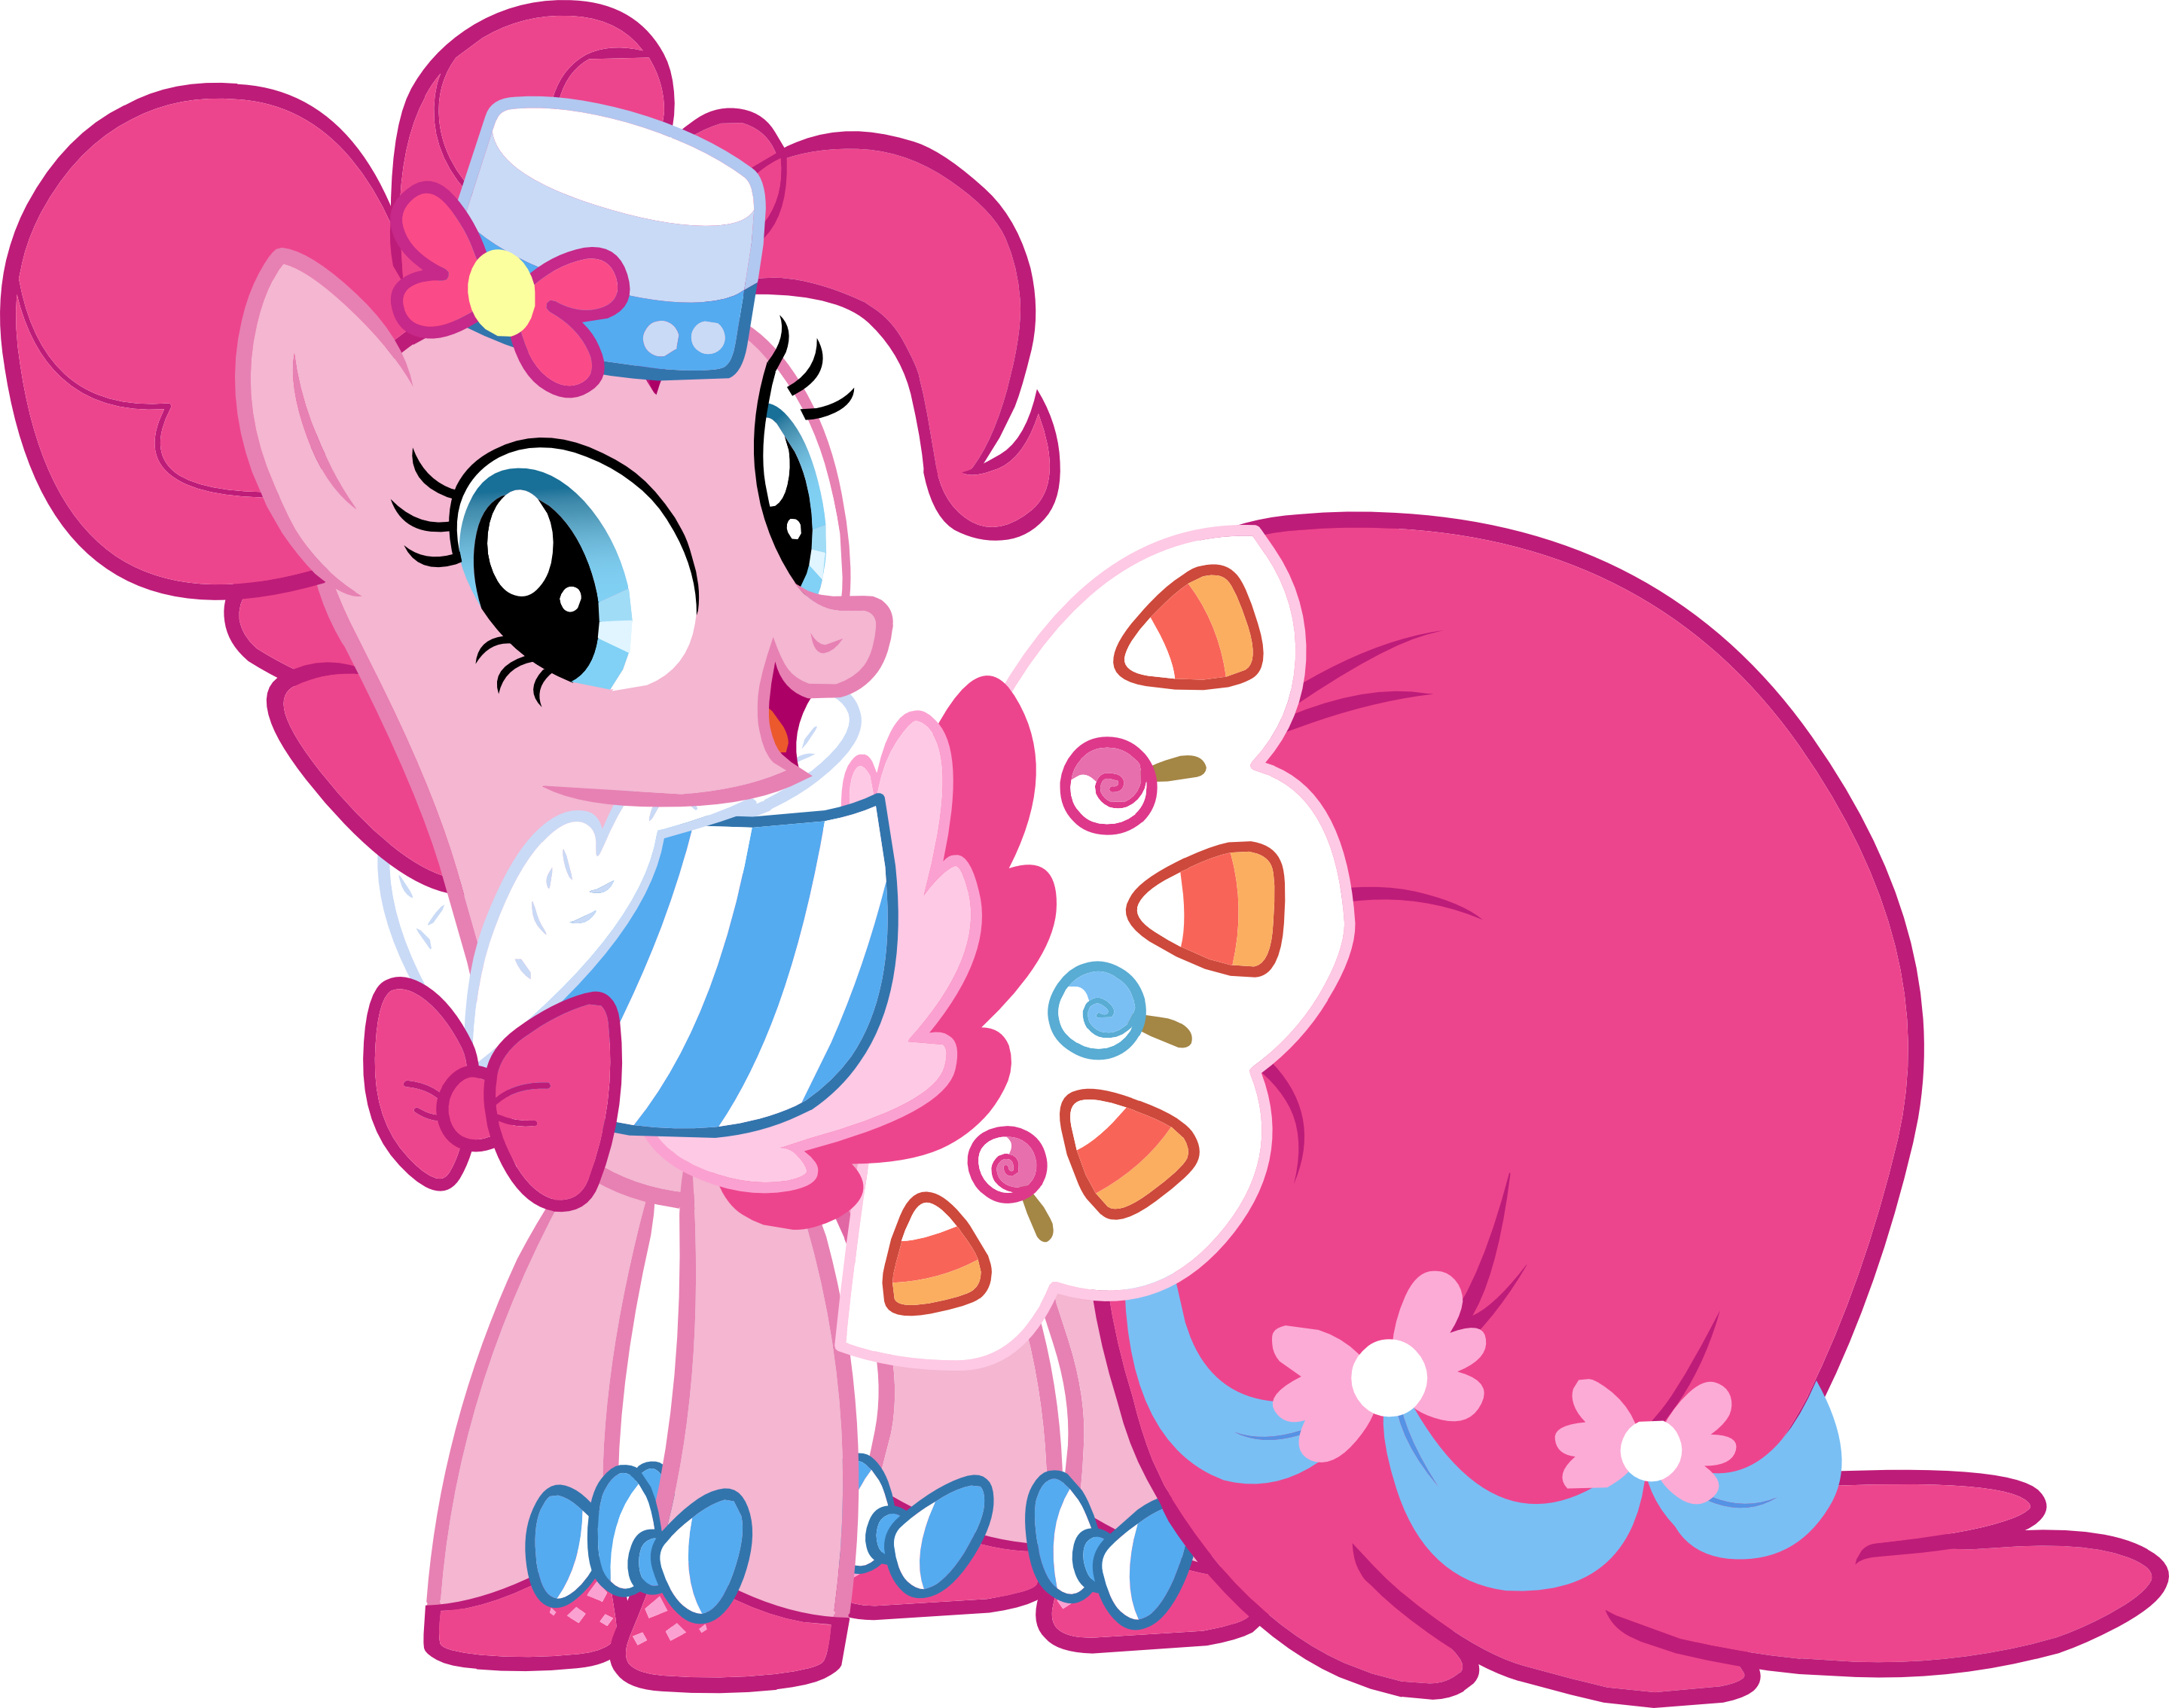 1000+ images about PINKIE PIE | My little pony ...